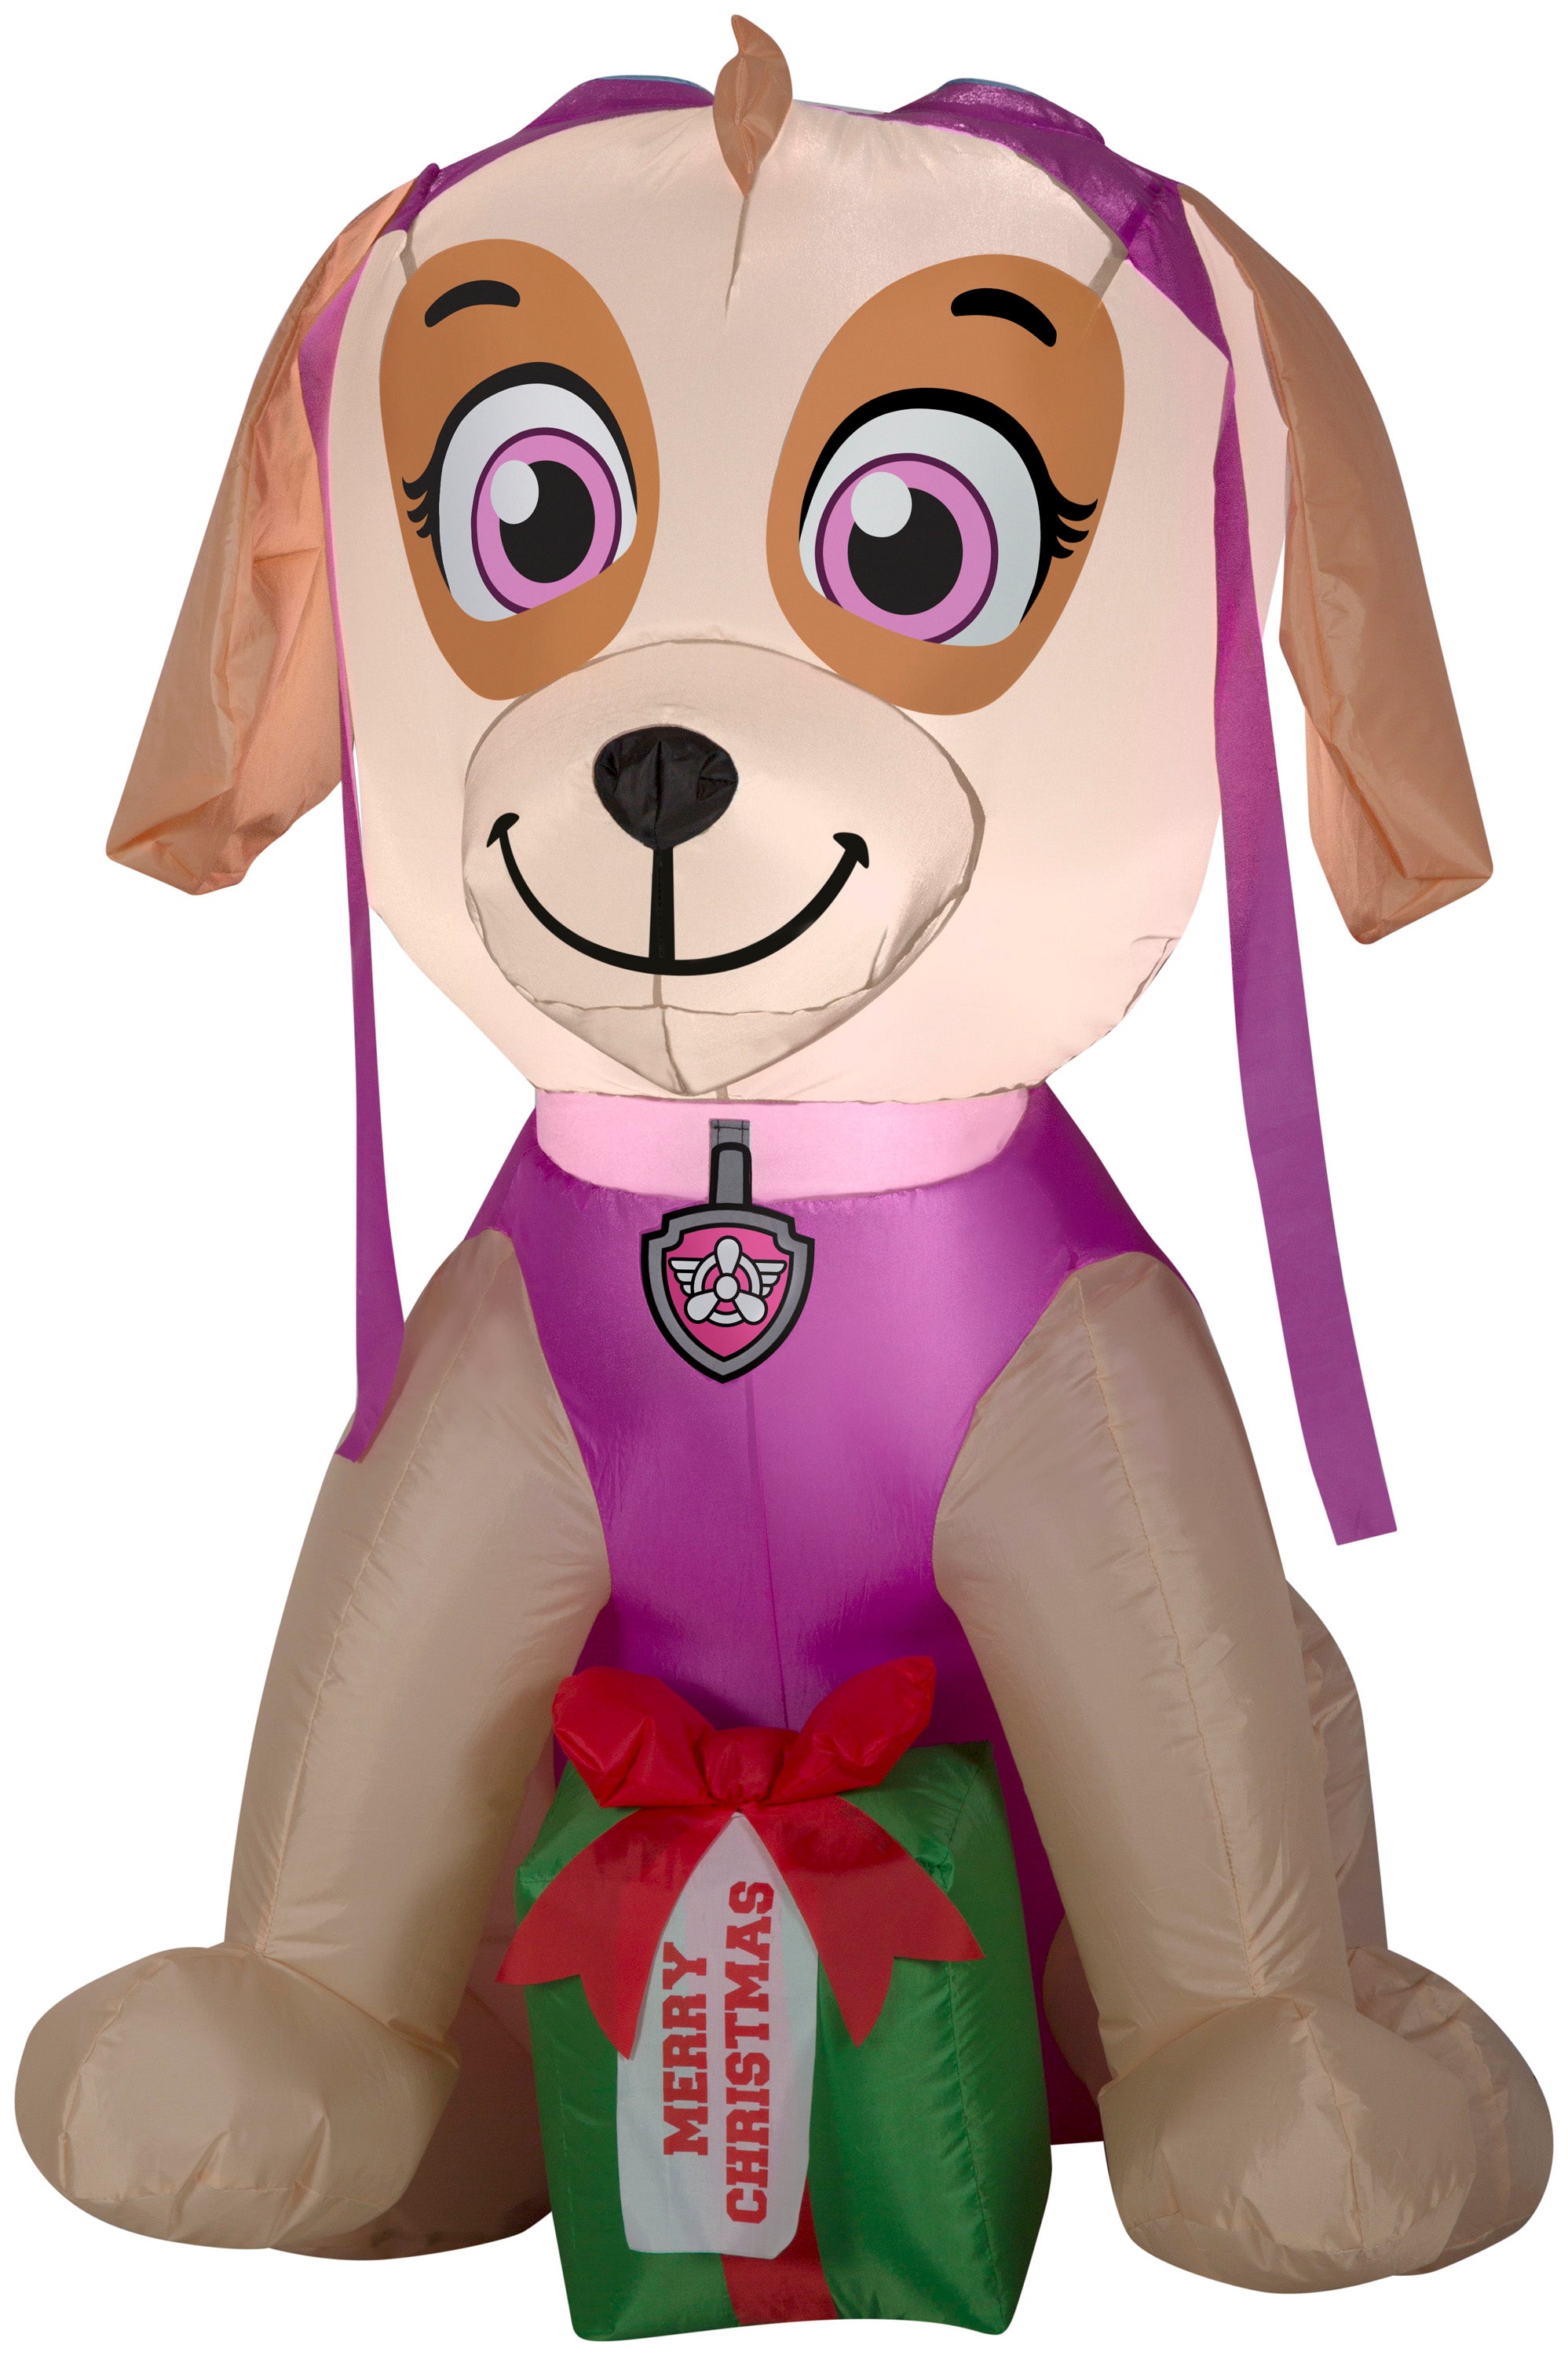 Gemmy Christmas Airblown Inflatable Skye with Present, 3 ft Tall, Pink